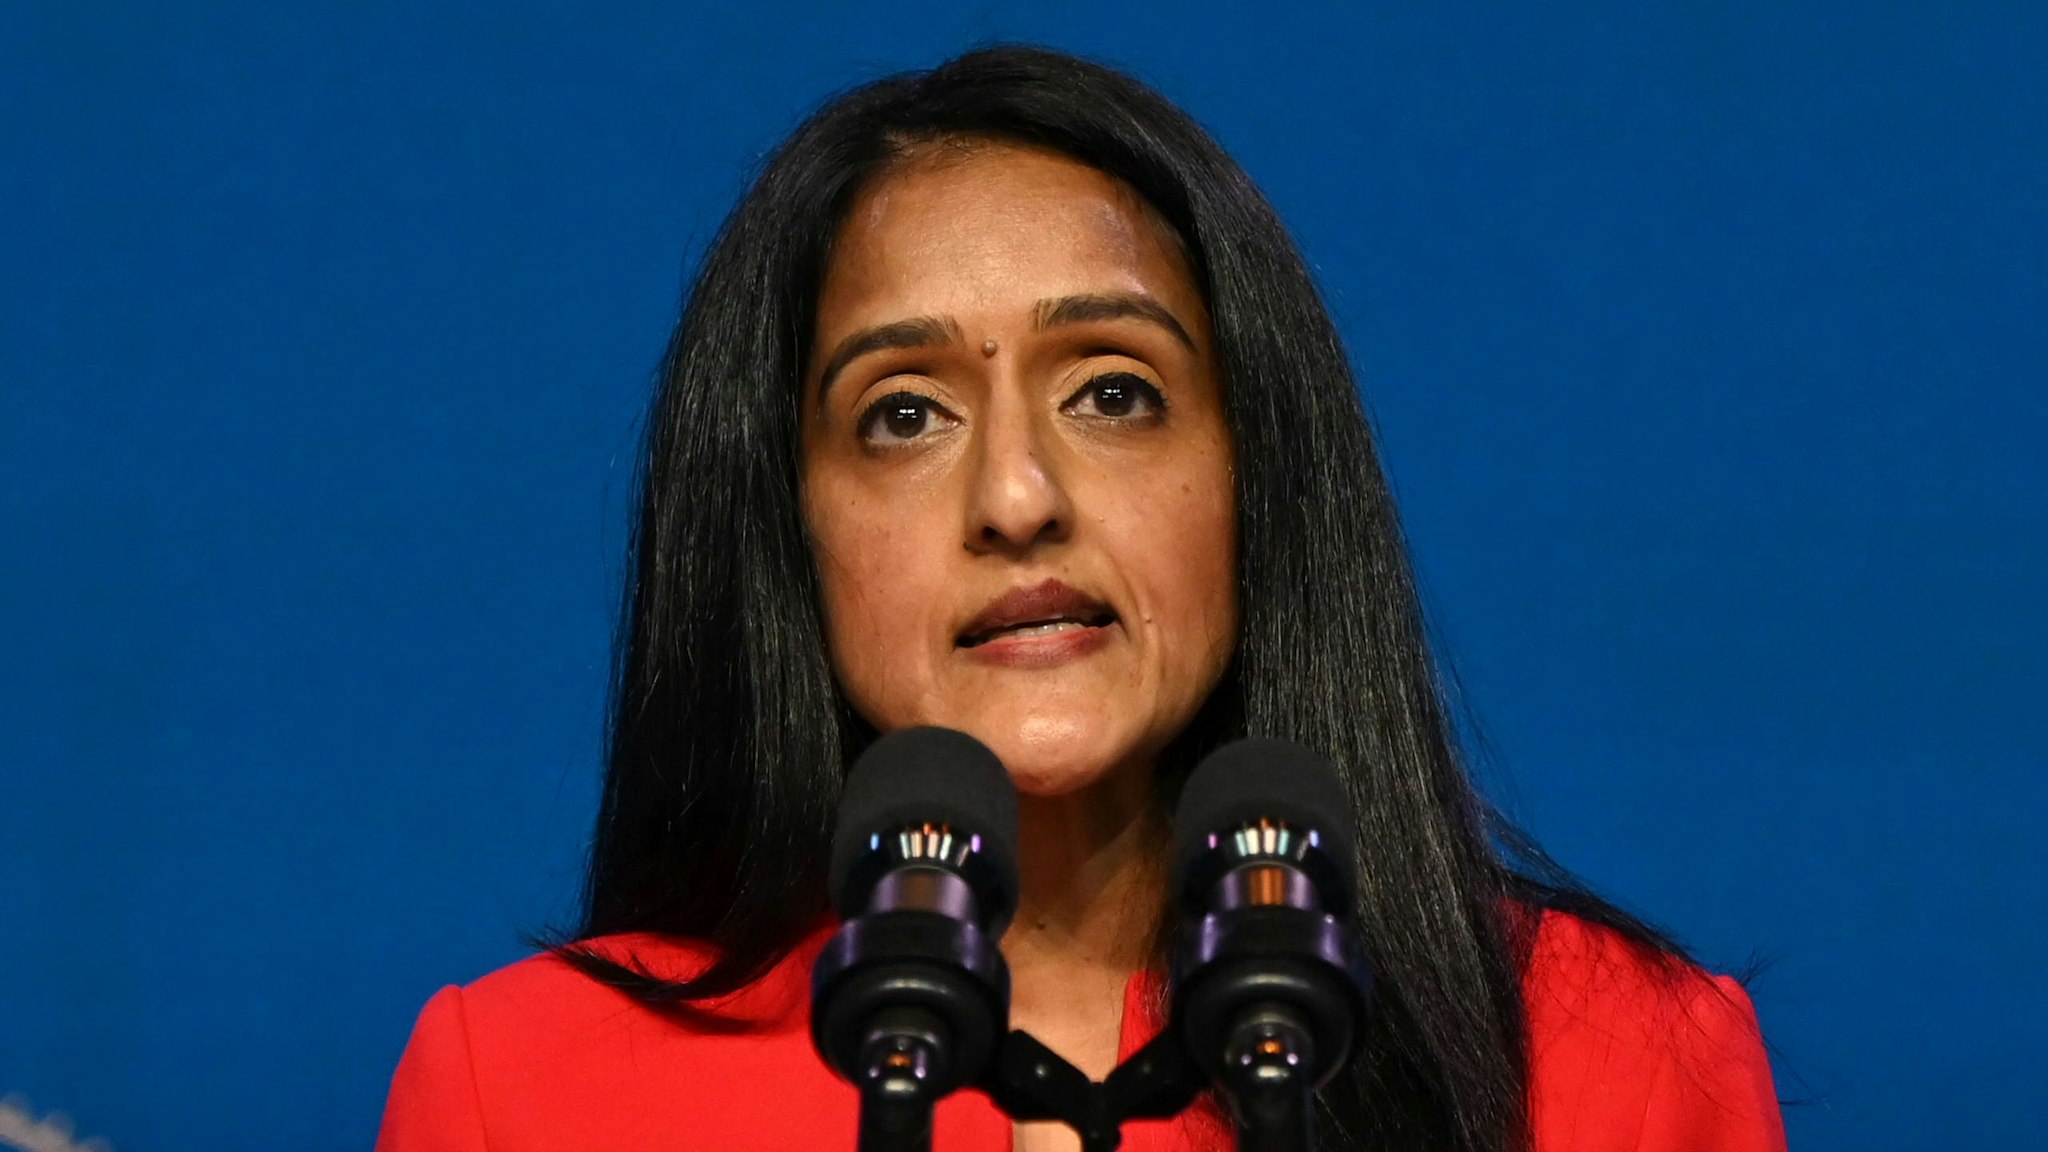 Vanita Gupta, nominee for Associate Attorney General, speaks after being nominated by US President-elect Joe Biden at The Queen theater January 7, 2021 in Wilmington, Delaware.